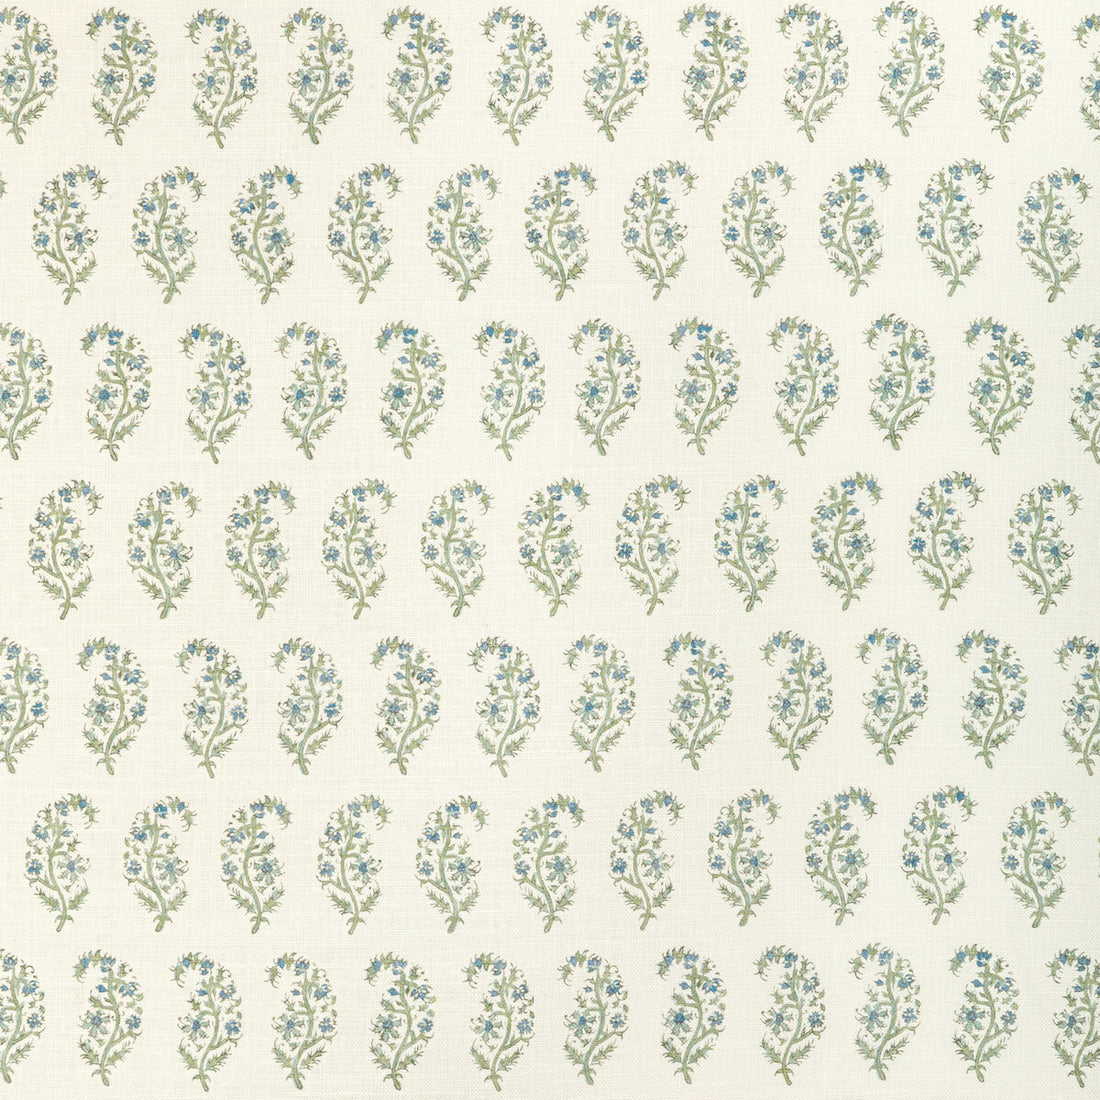 Indiennes Paisley fabric in sea color - pattern 2022107.530.0 - by Lee Jofa in the Sarah Bartholomew collection